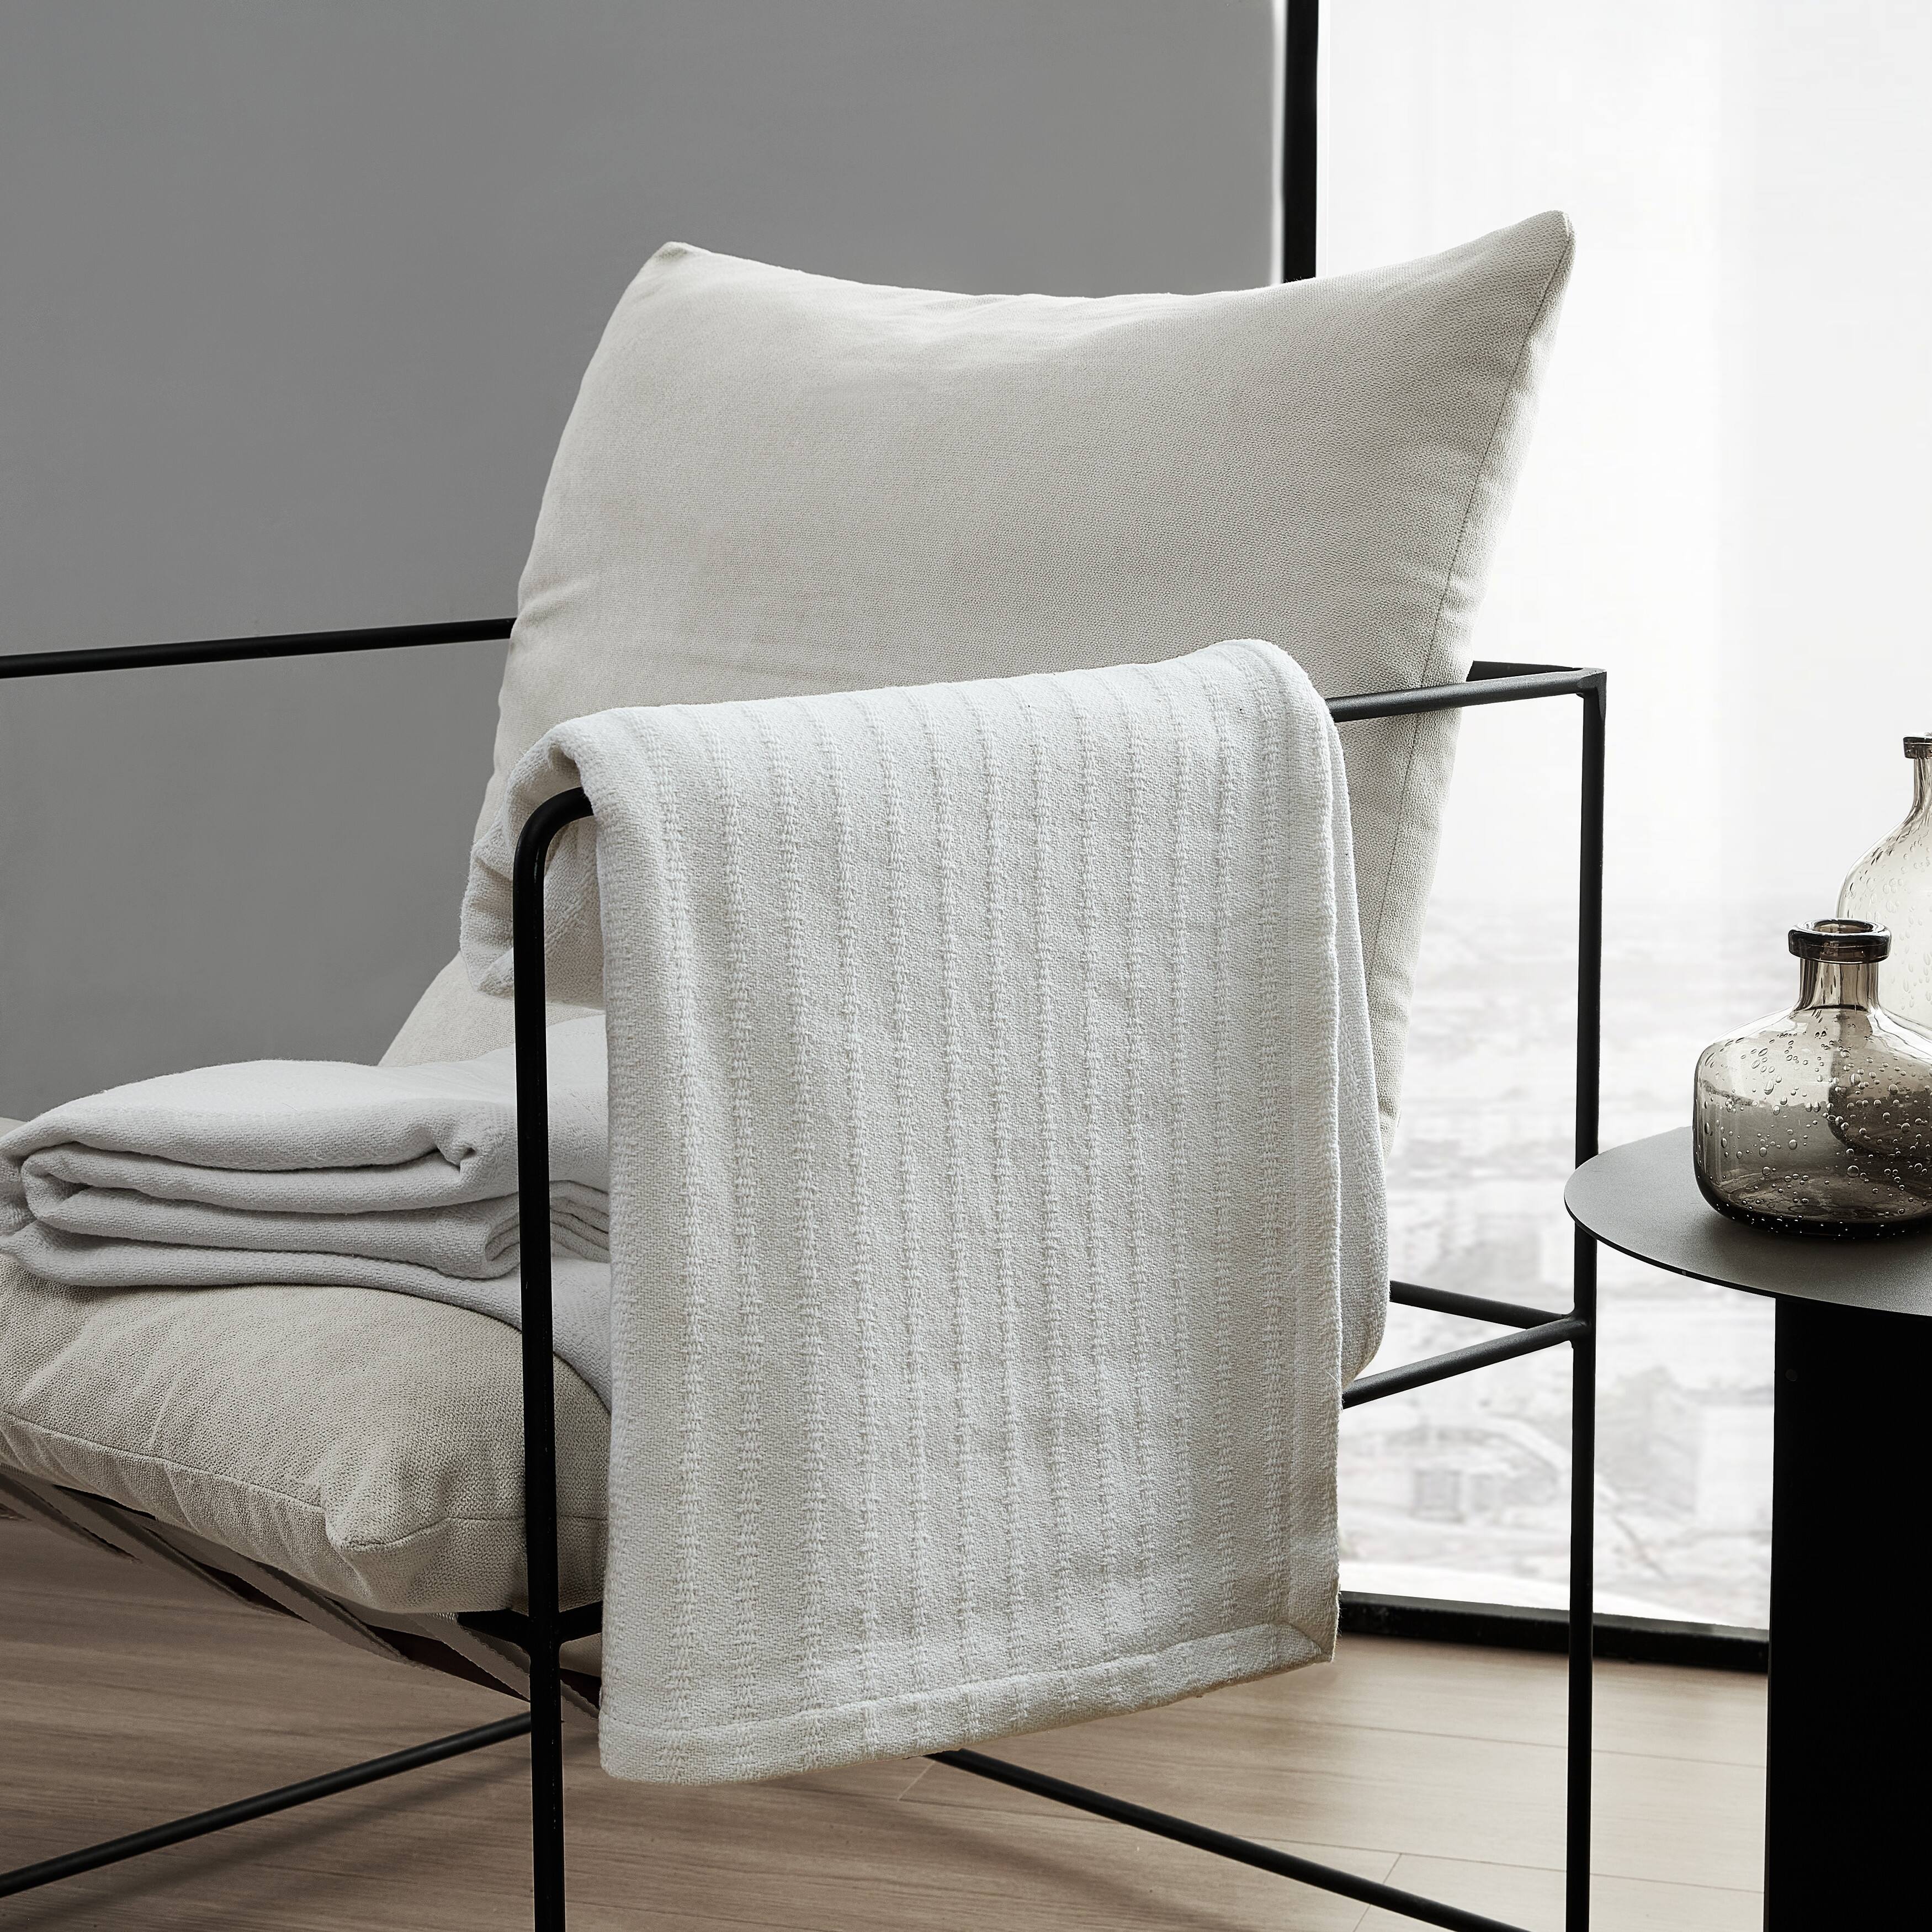 Vera Wang All Over Rib Cotton White Blanket - On Sale - Bed Bath ...